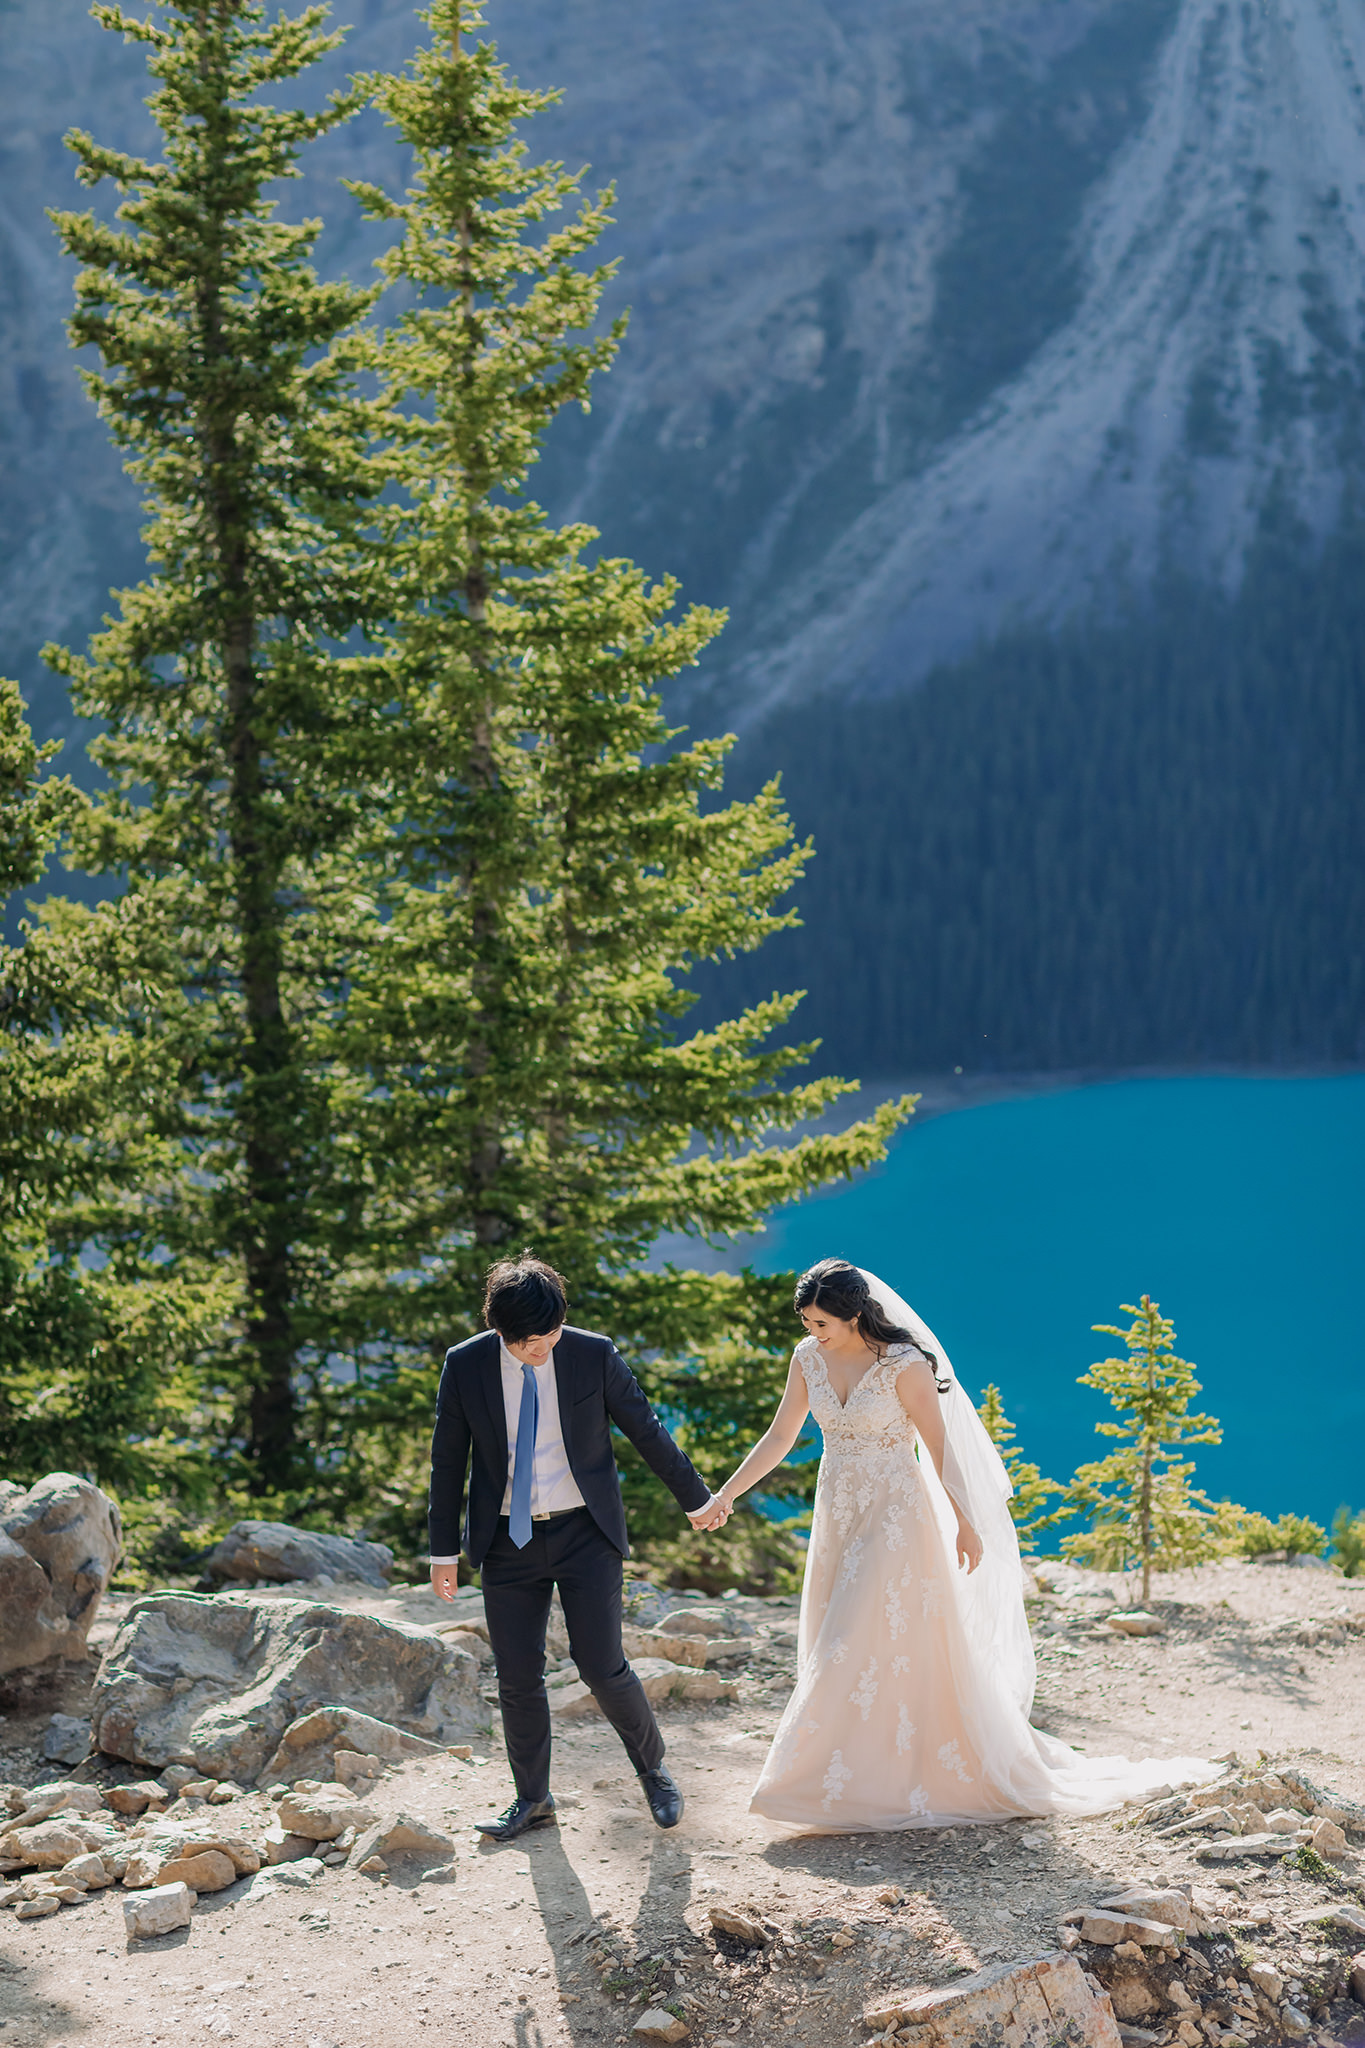 Rocky Mountain wedding tour bride groom portraits at Peyto Lake viewpoint in the evening in Banff National Park photographed by mountain elopement specialist ENV Photography